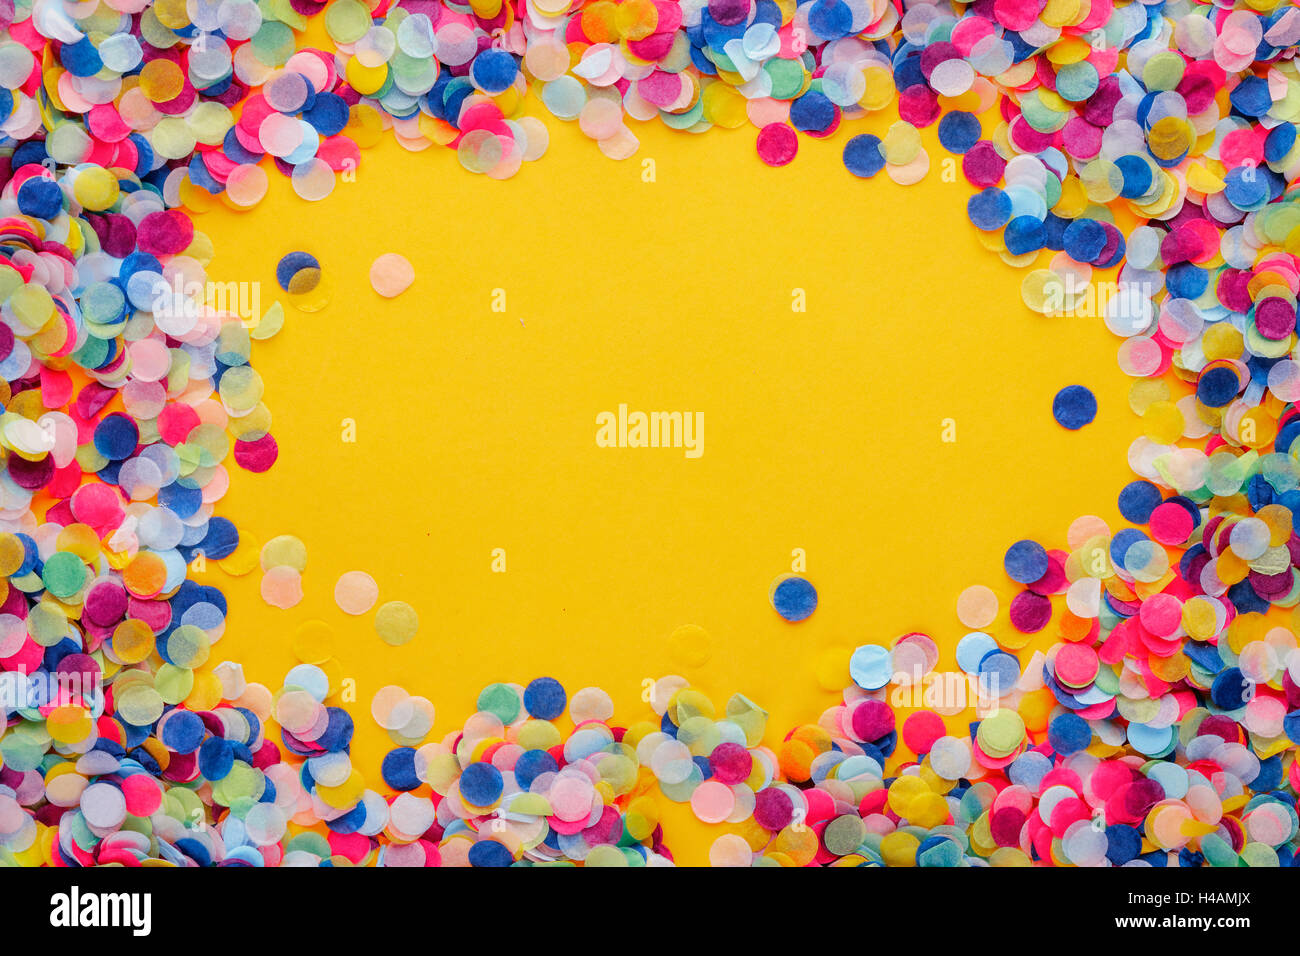 Colorful Confetti frame on yellow Background Stock Photo